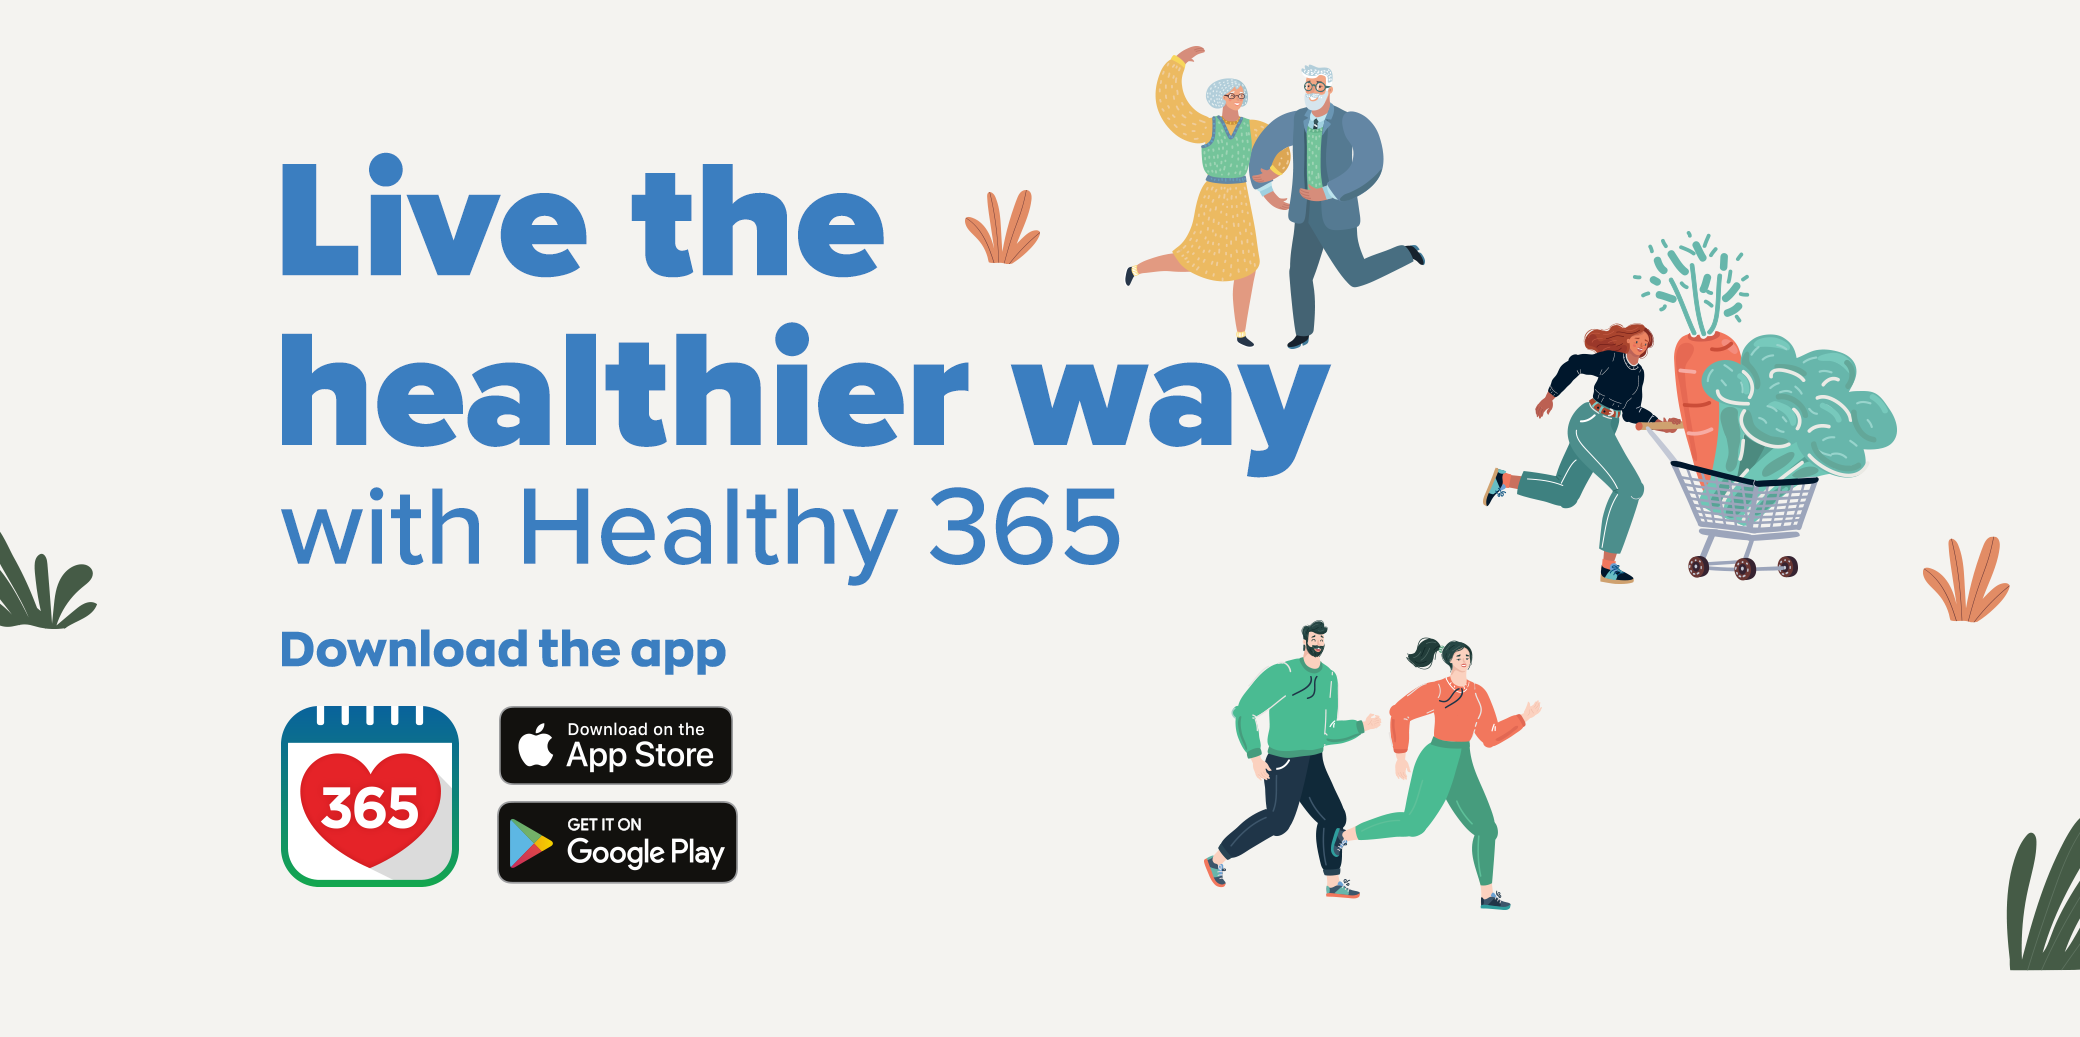 Live the healthier way with Healthy 365